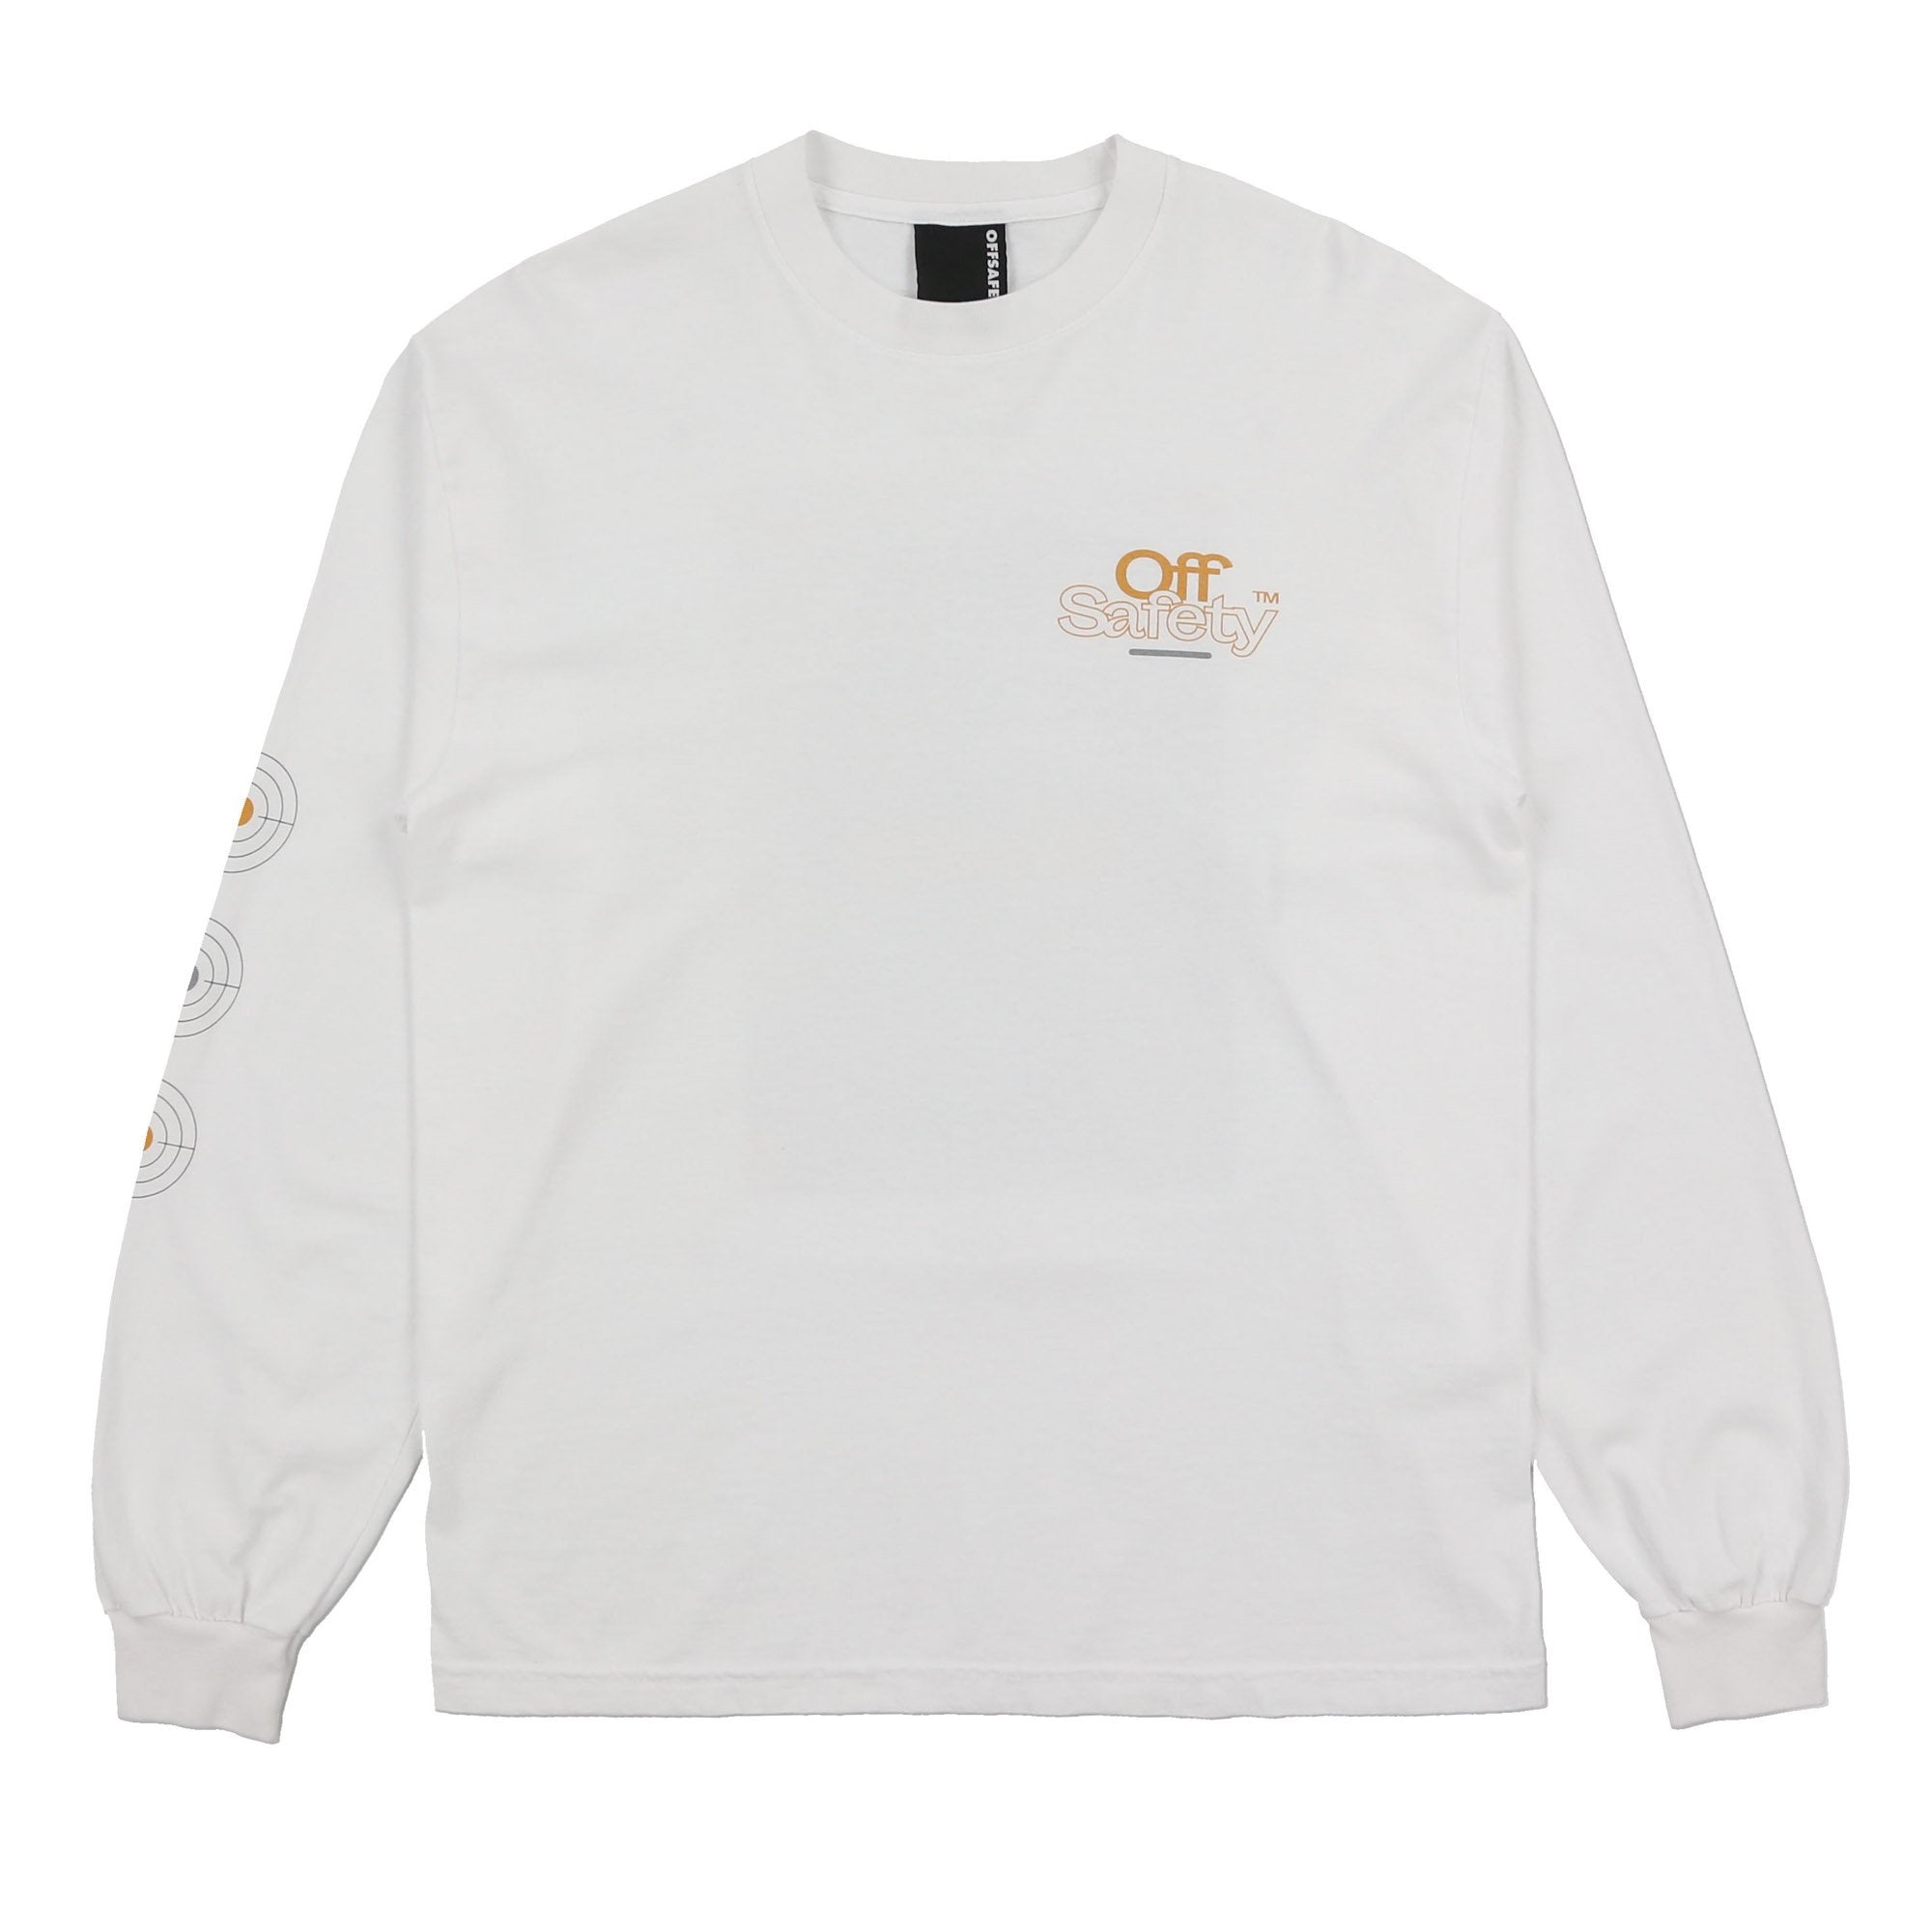 GUIDE LINES LS TEE 長袖Tシャツ / WHITE – OFFSAFETY JAPAN